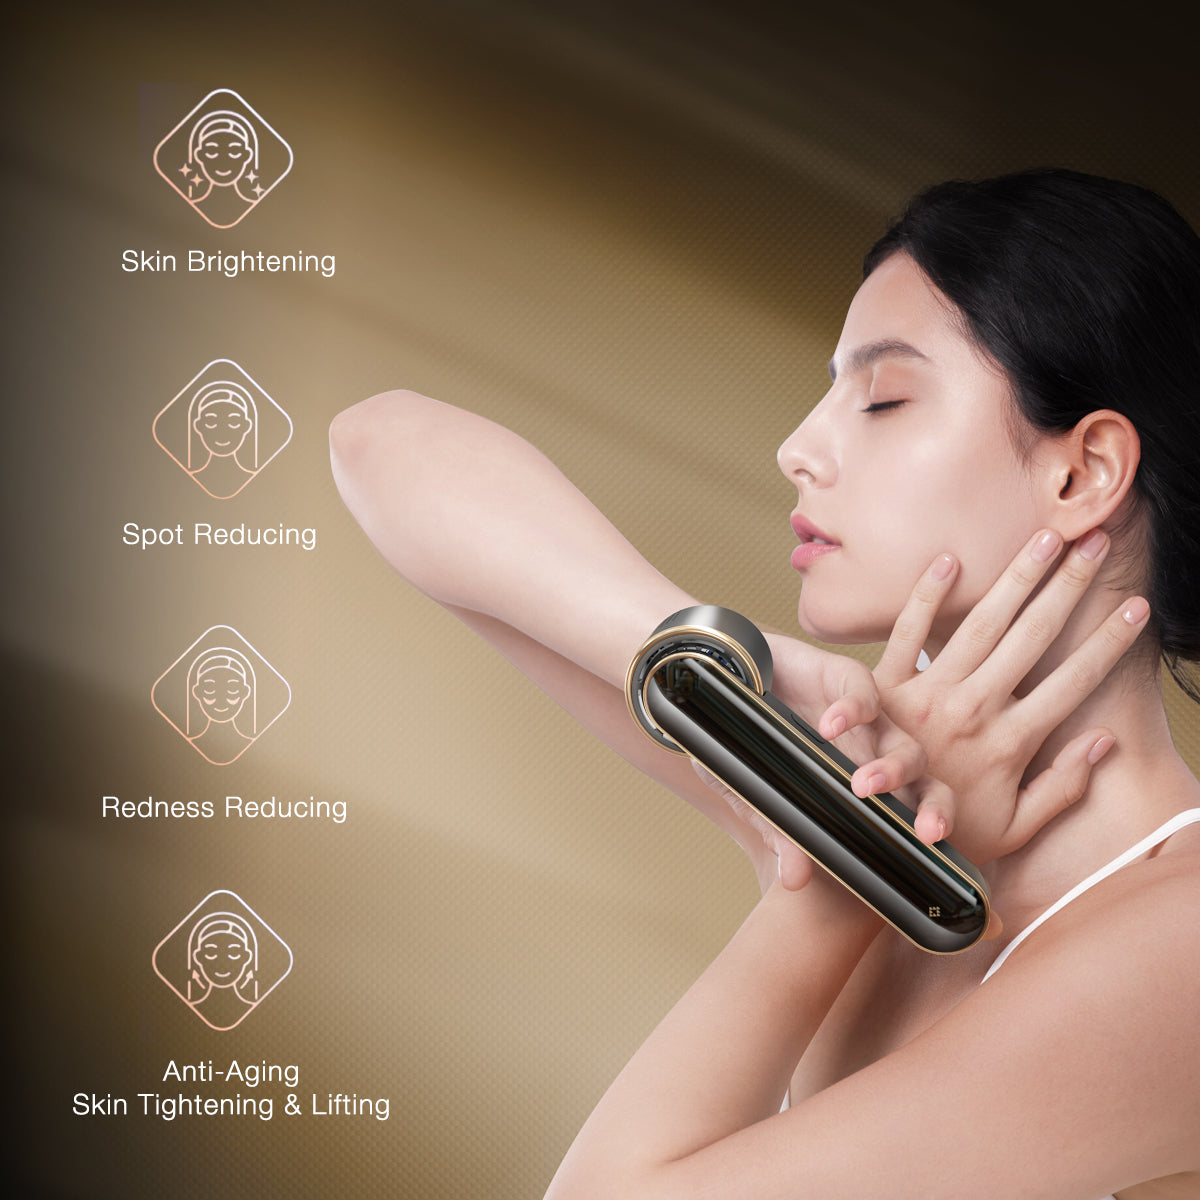 Woman receiving skin brightening and anti-aging treatment with JOVS Blacken DPL Photofacial Device, enhancing skin texture and reducing redness.